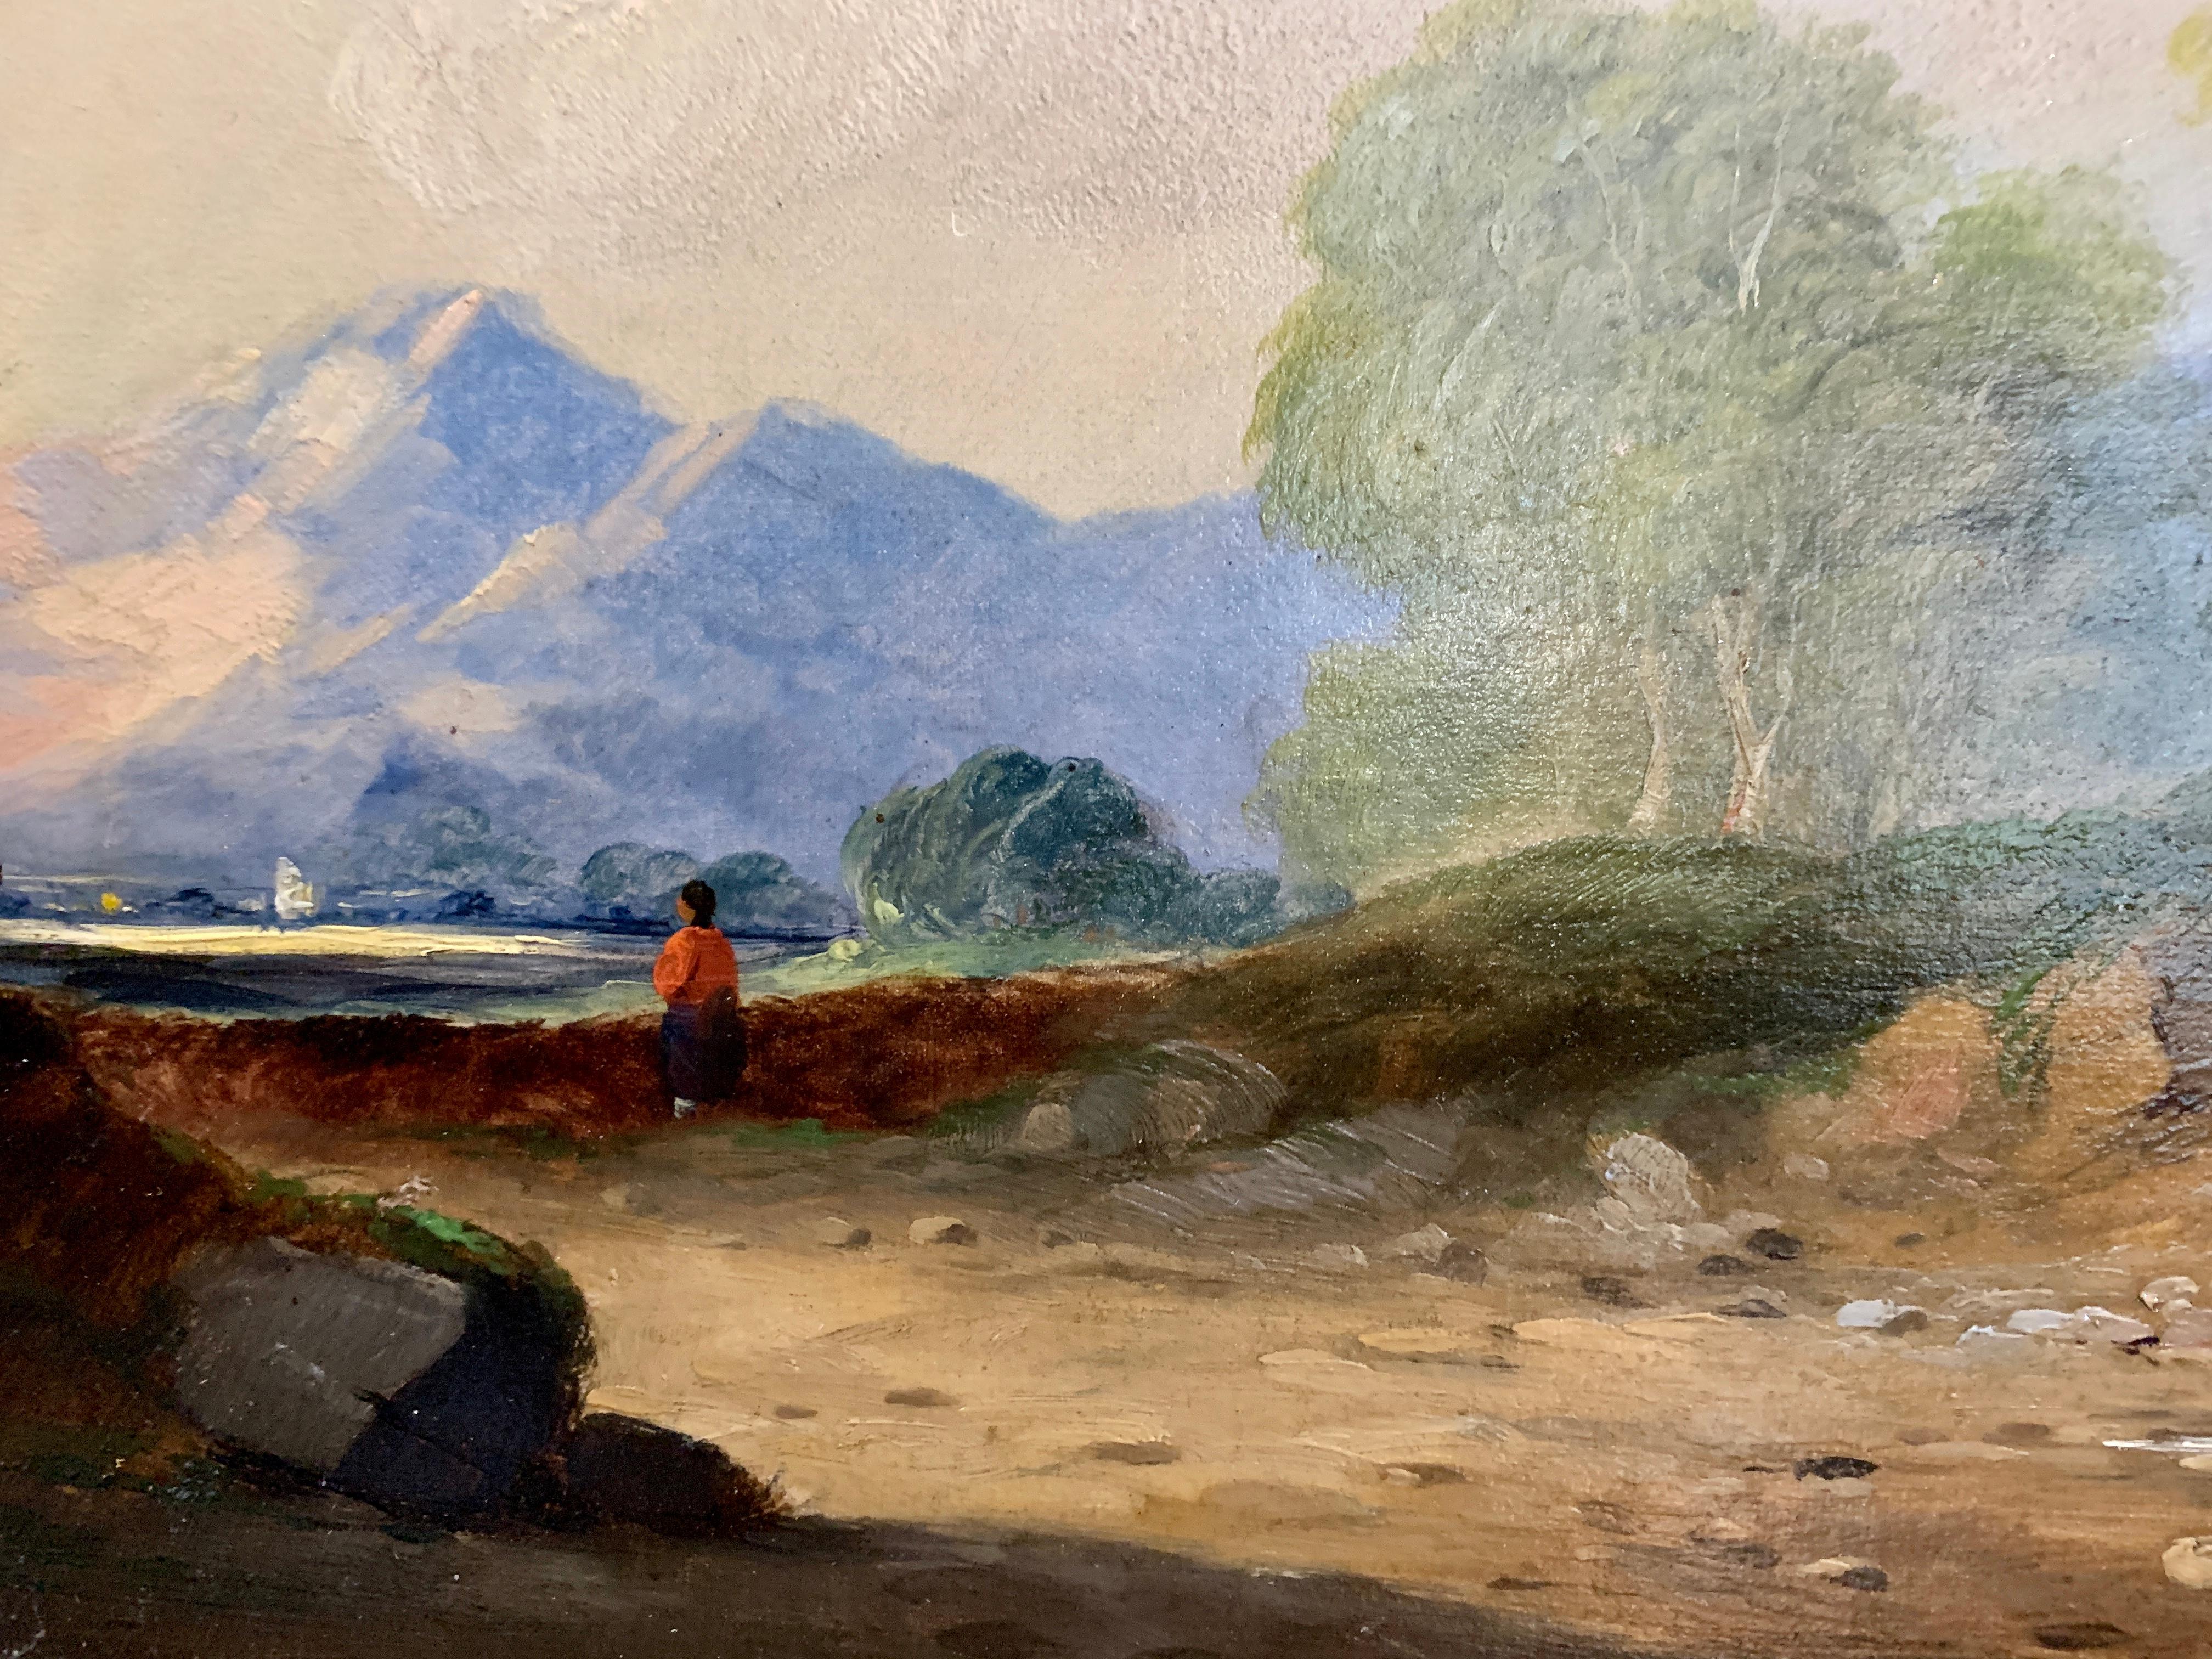 Pair of English or Irish 19th century landscapes in a similar style to the work of James Arthur O,Connor

O'Connor was a well known Irish landscape painter from the early part of the 19th century. His work is often of an extensive landscape with a